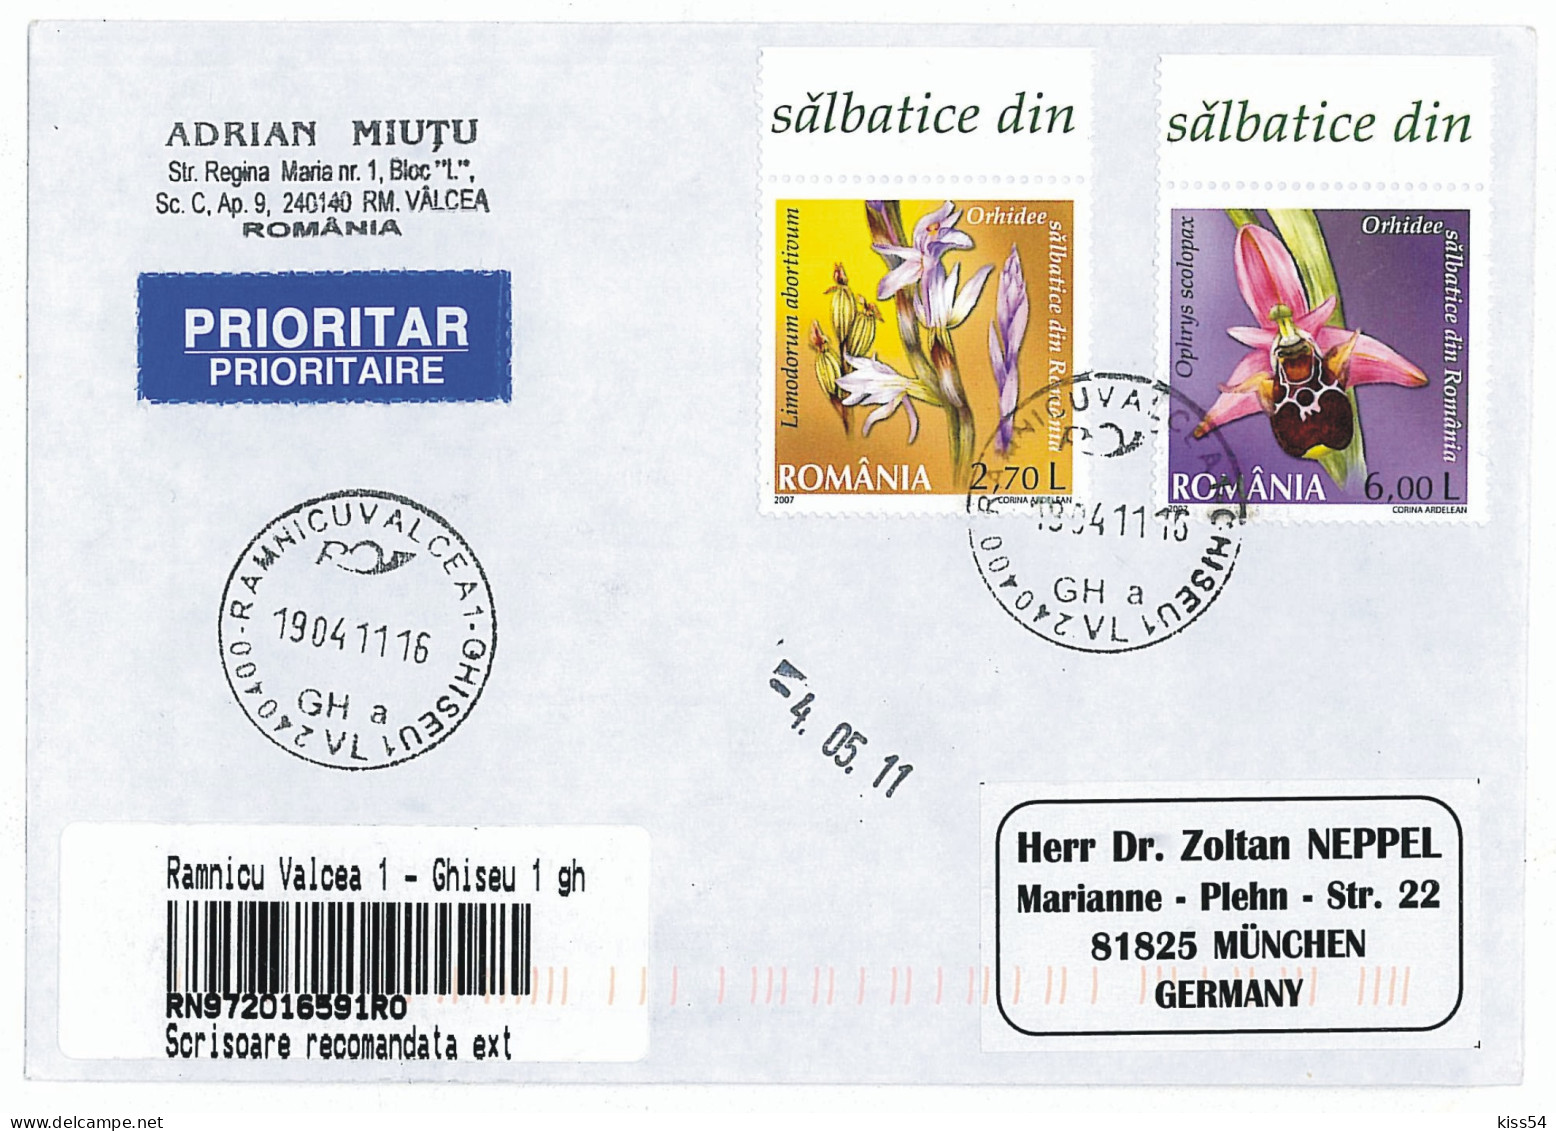 NCP 25 - 1-a ORCHIDS, Romania - INTERNATIONAL Registered - 2011 - Covers & Documents